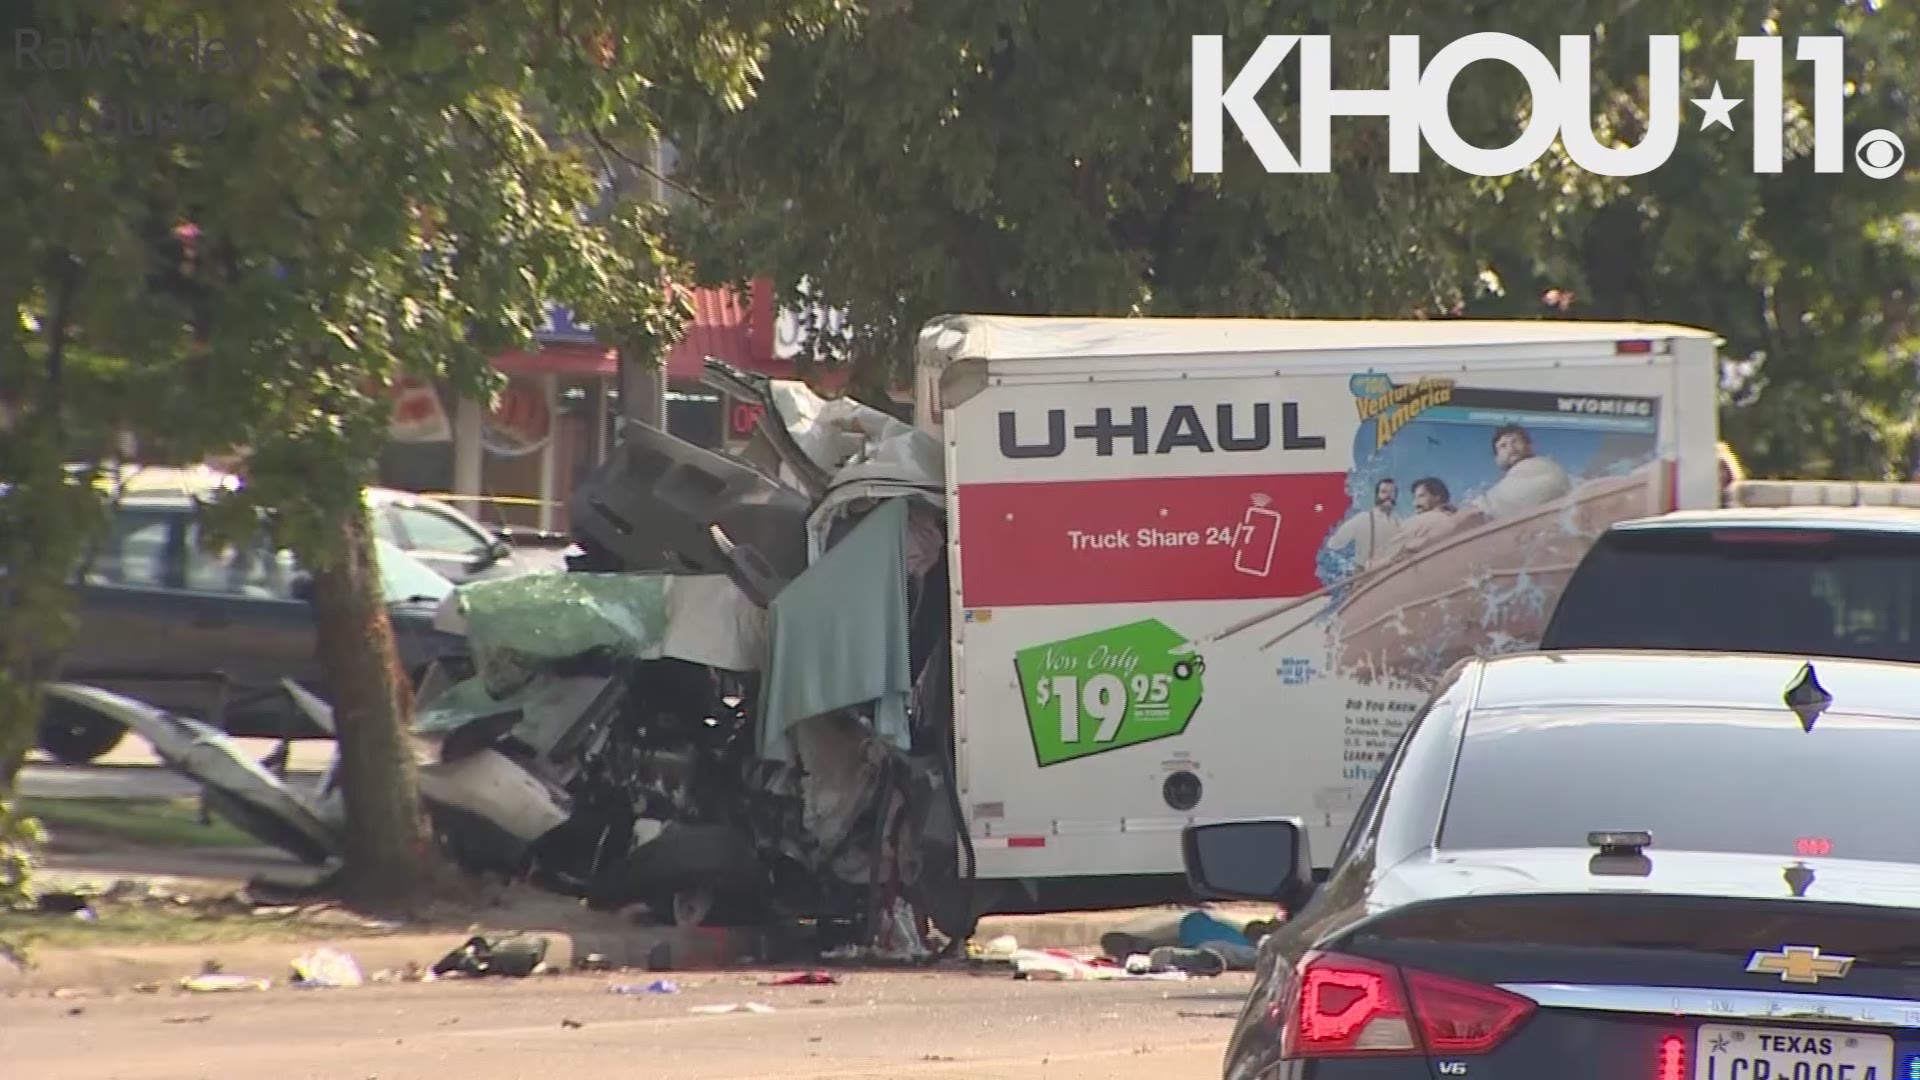 A man was killed in a crash on Thursday, July 16, 2020. Police said he was fleeing the scene of a hit-and-run when he crashed his U-Haul into the back of a truck.